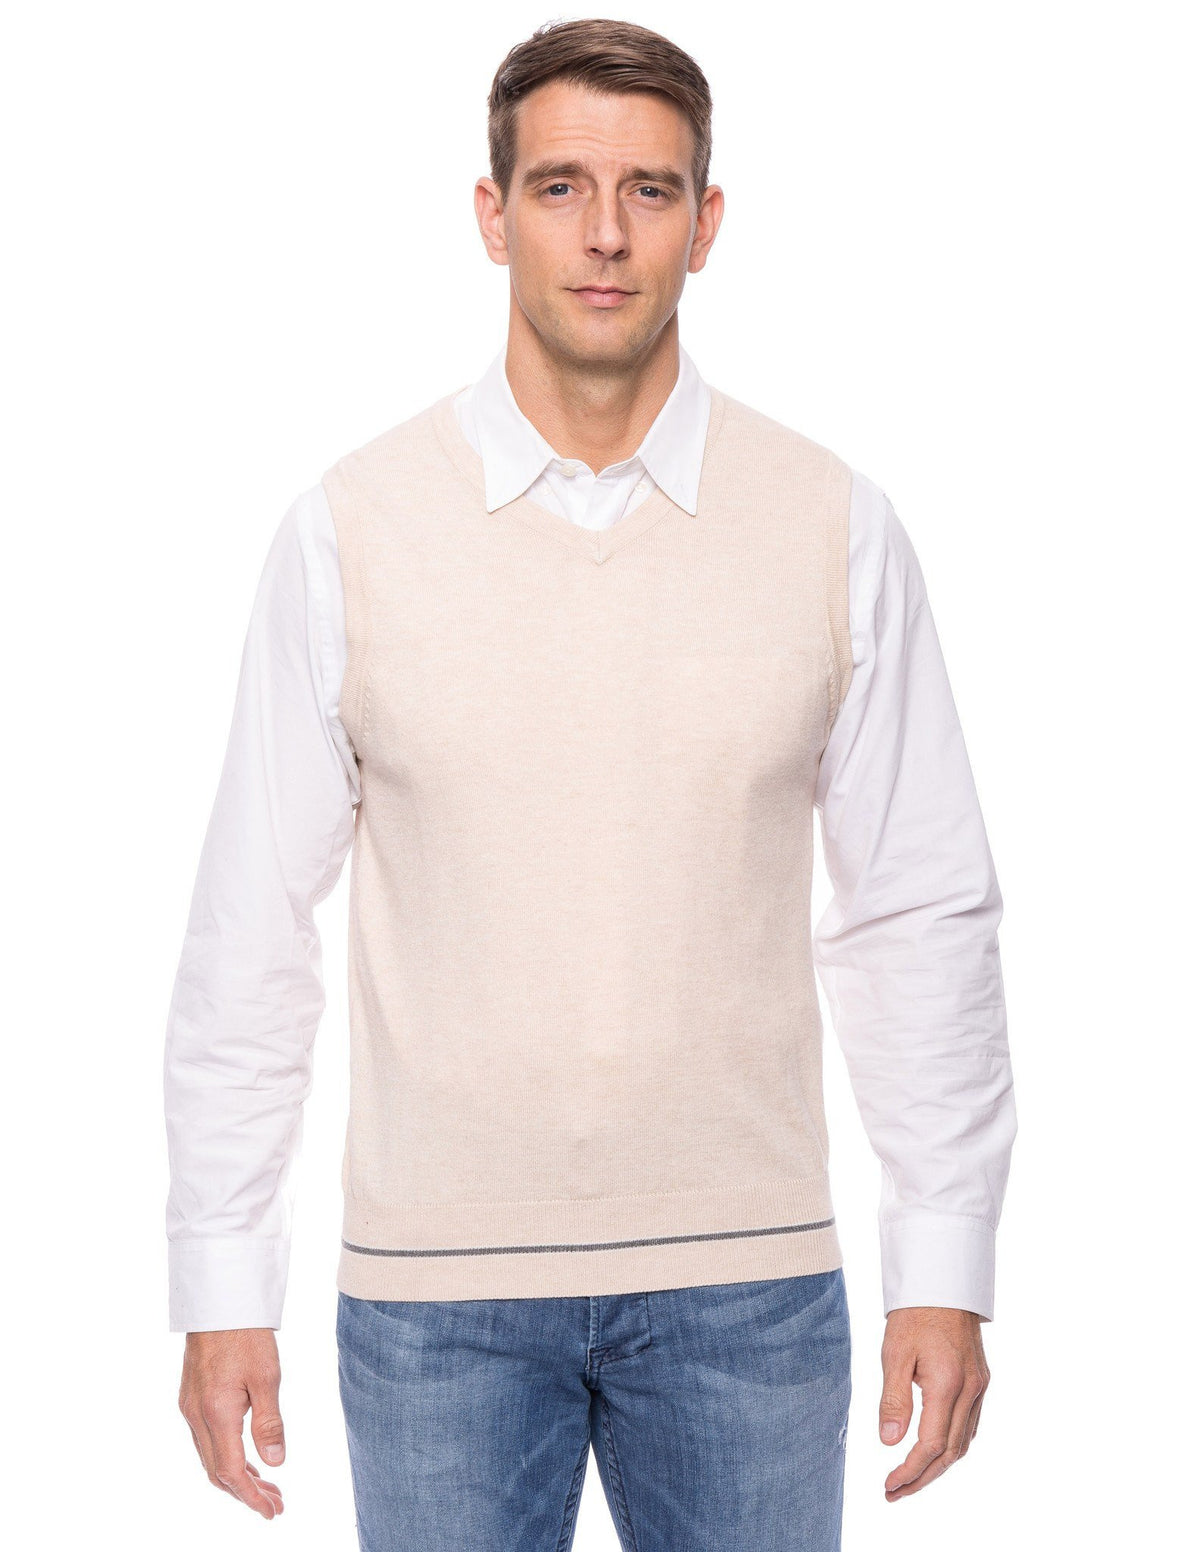 Gift Packaged Men's Cashmere Blend Sweater Vest - Stone